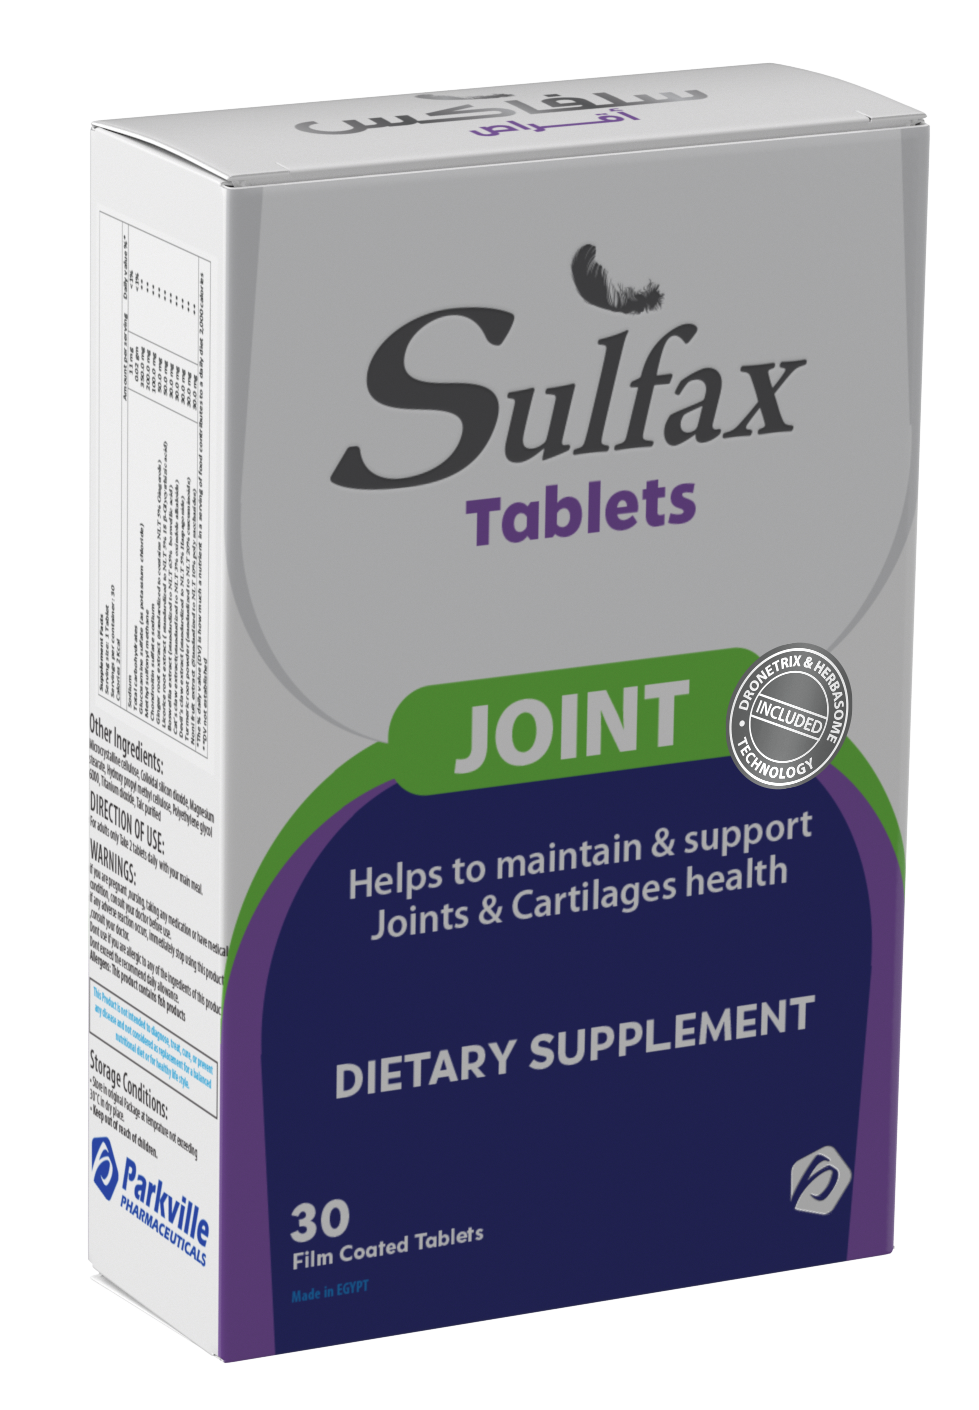 sulfax joint tablet